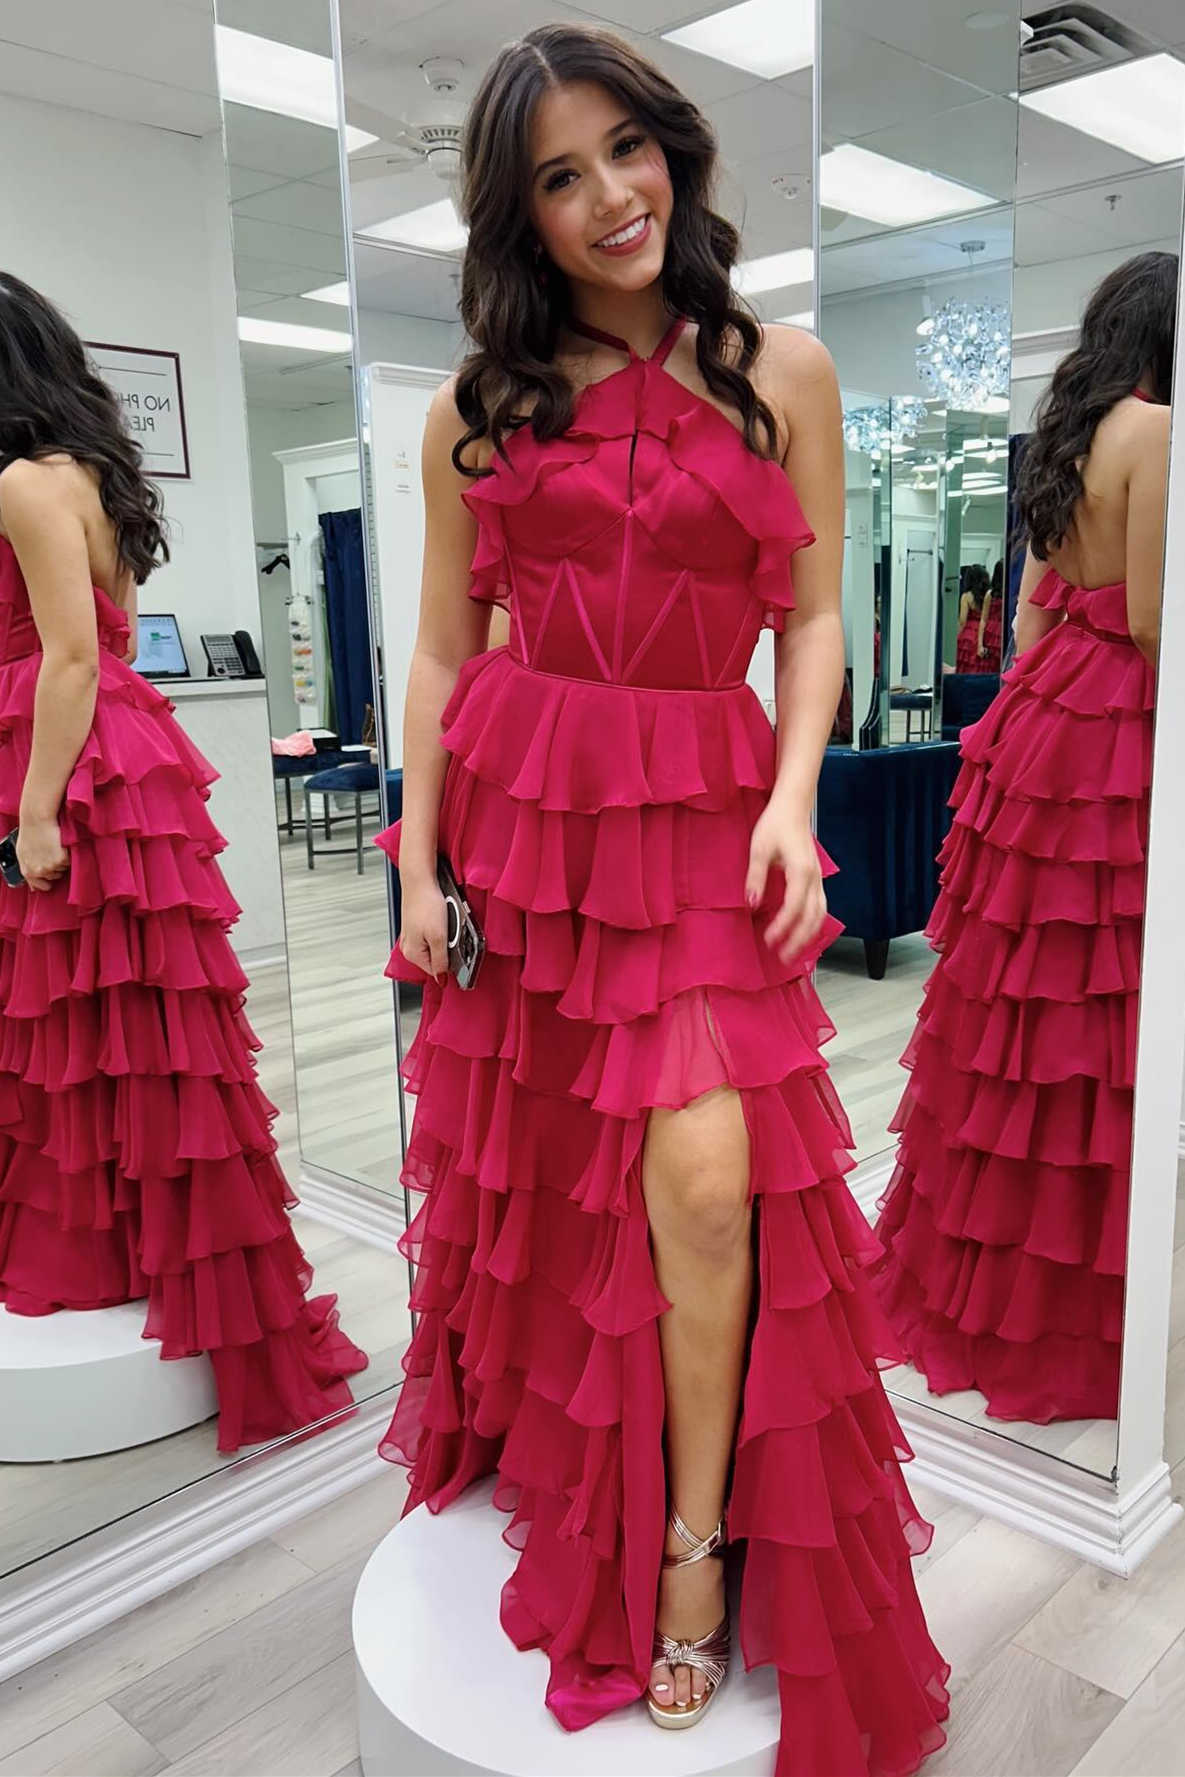 Red Halter Ruffle Tiered Chiffon Prom Dress with Slit